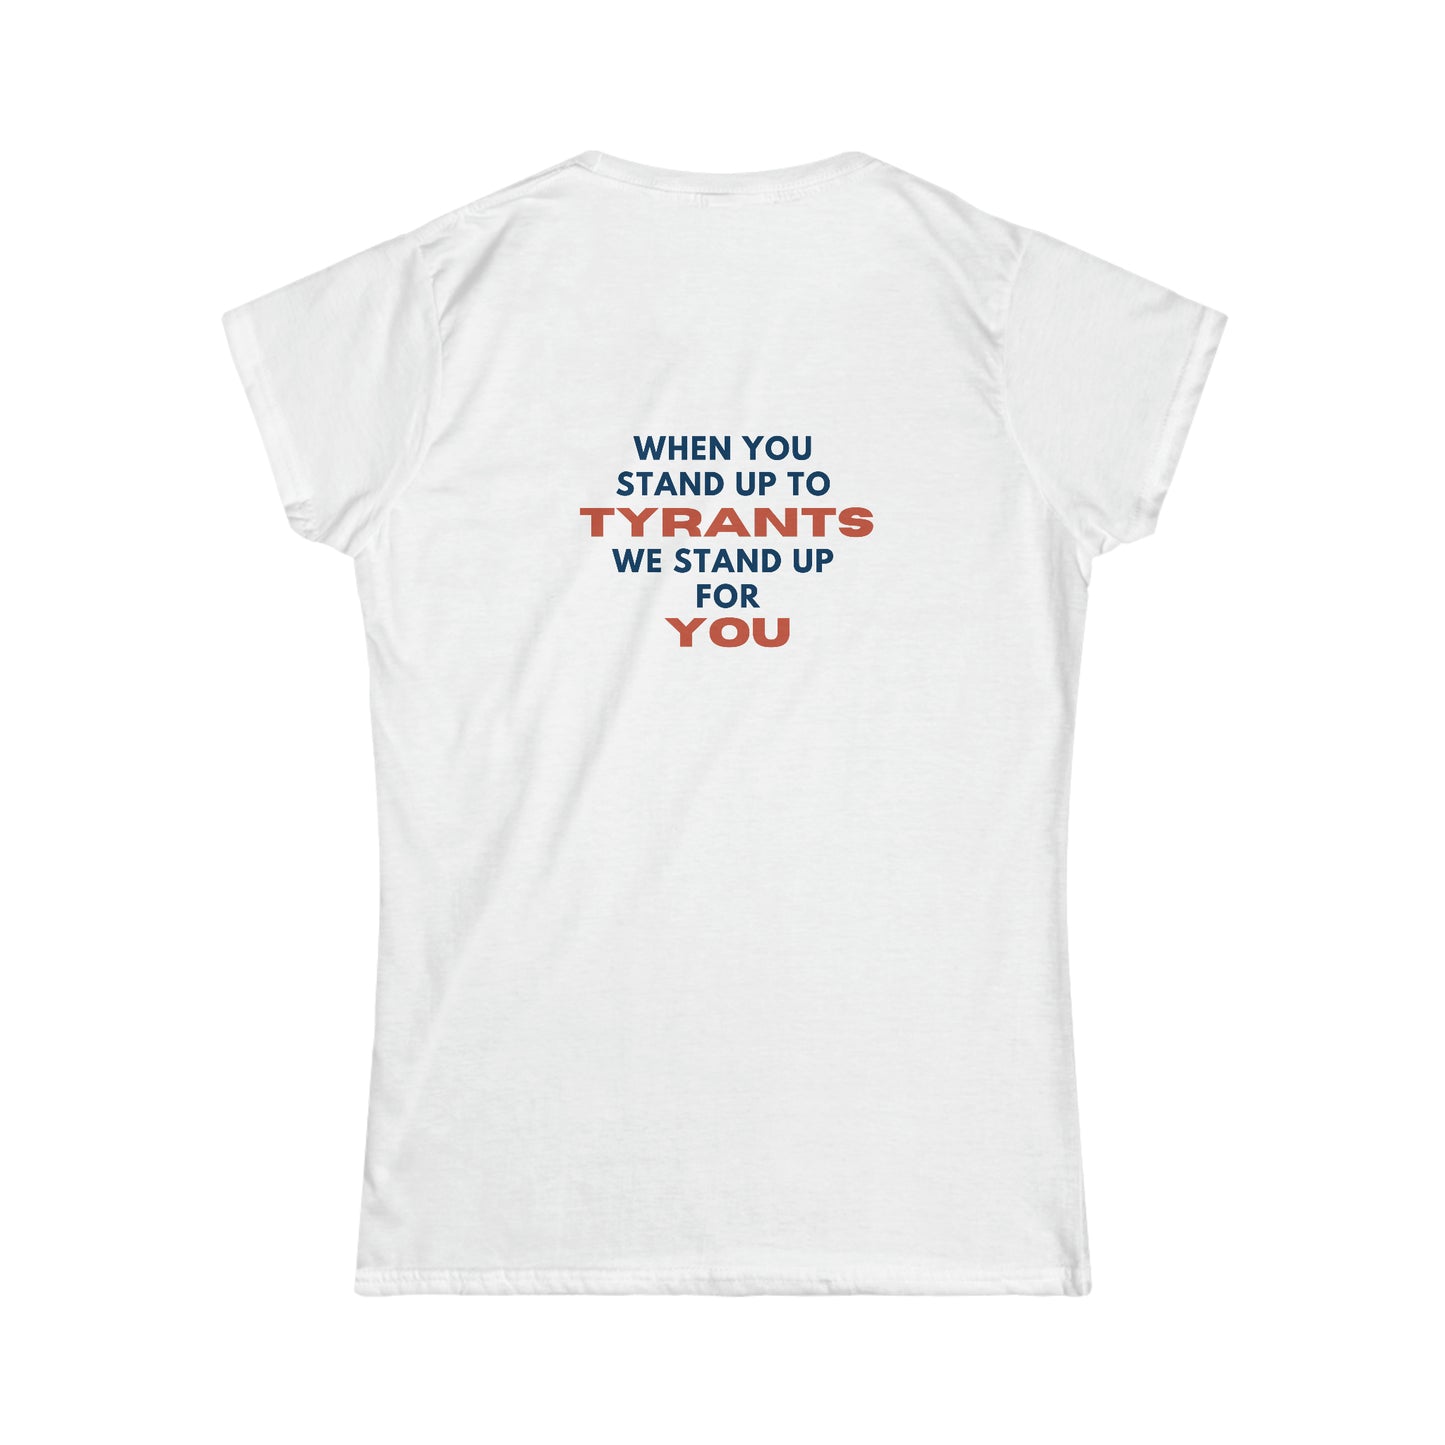 MEMBERS ONLY: Women's Stand Up to Tyranny Shirt